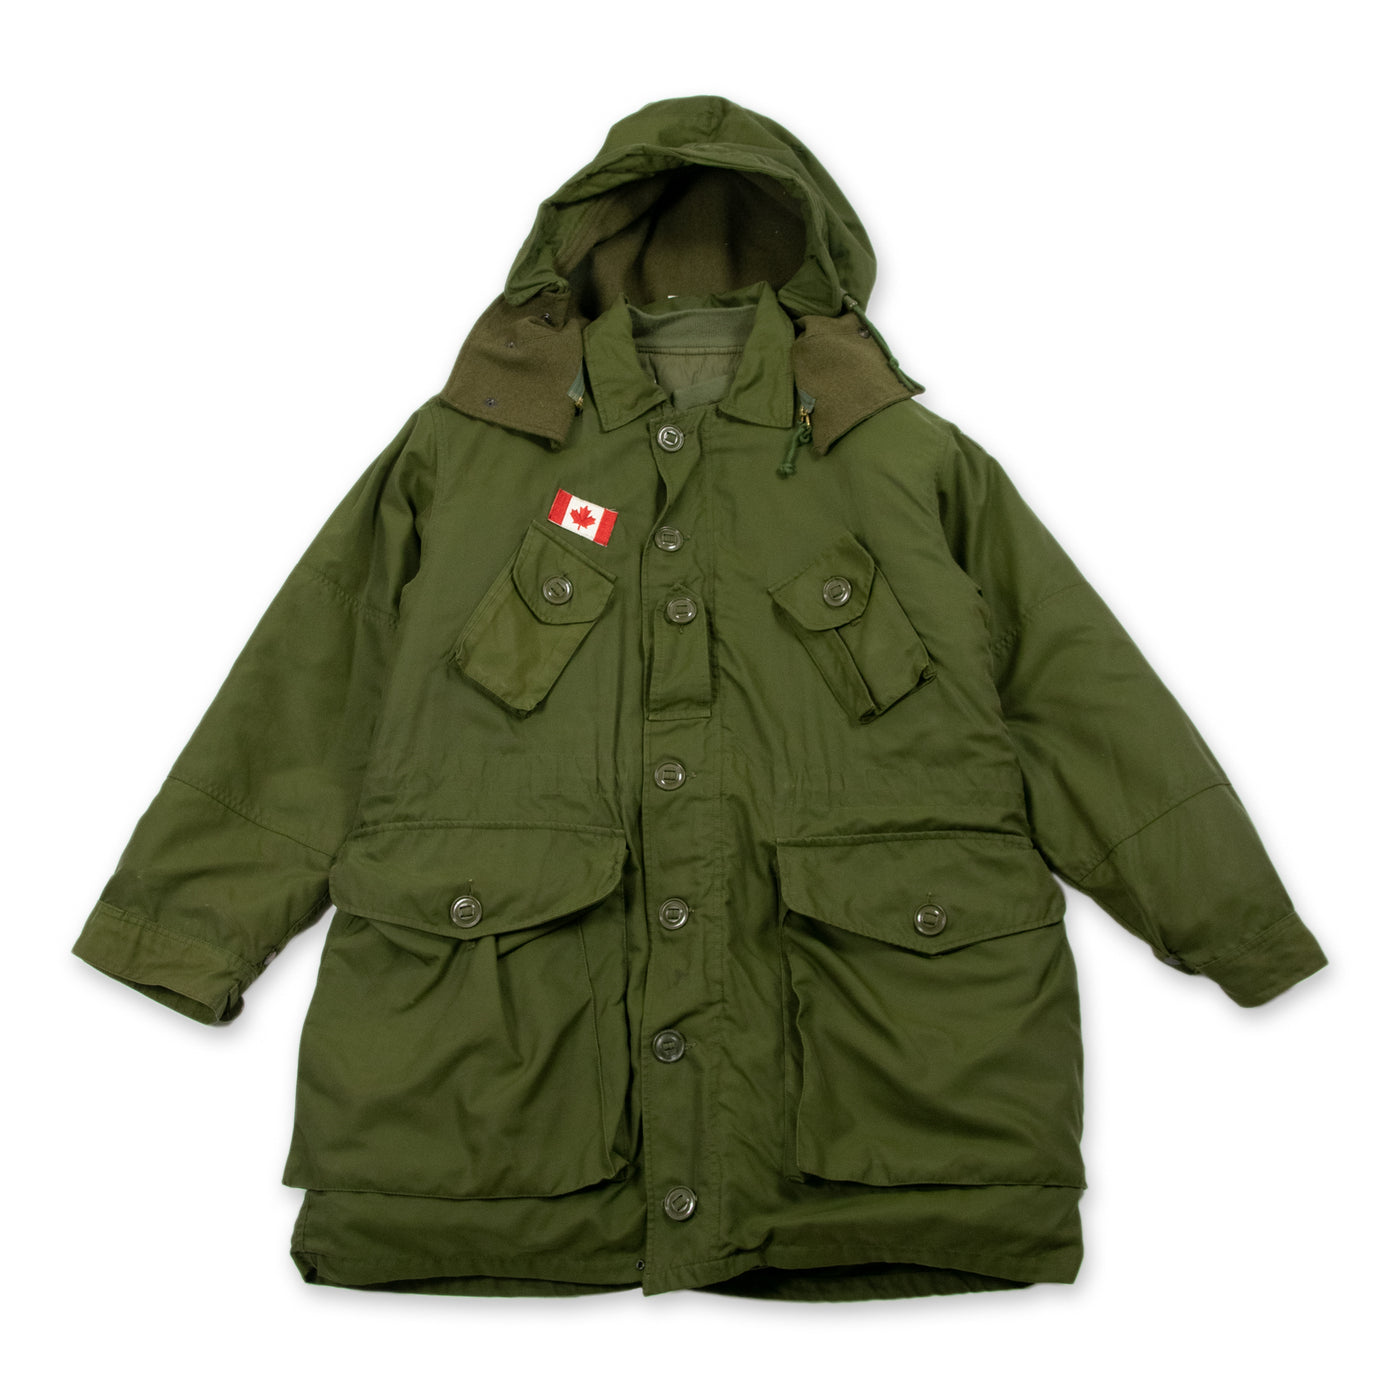 Canadian Army Arctic Winter Parka Heavy Duty Jacket Olive Green L Regular FRONT